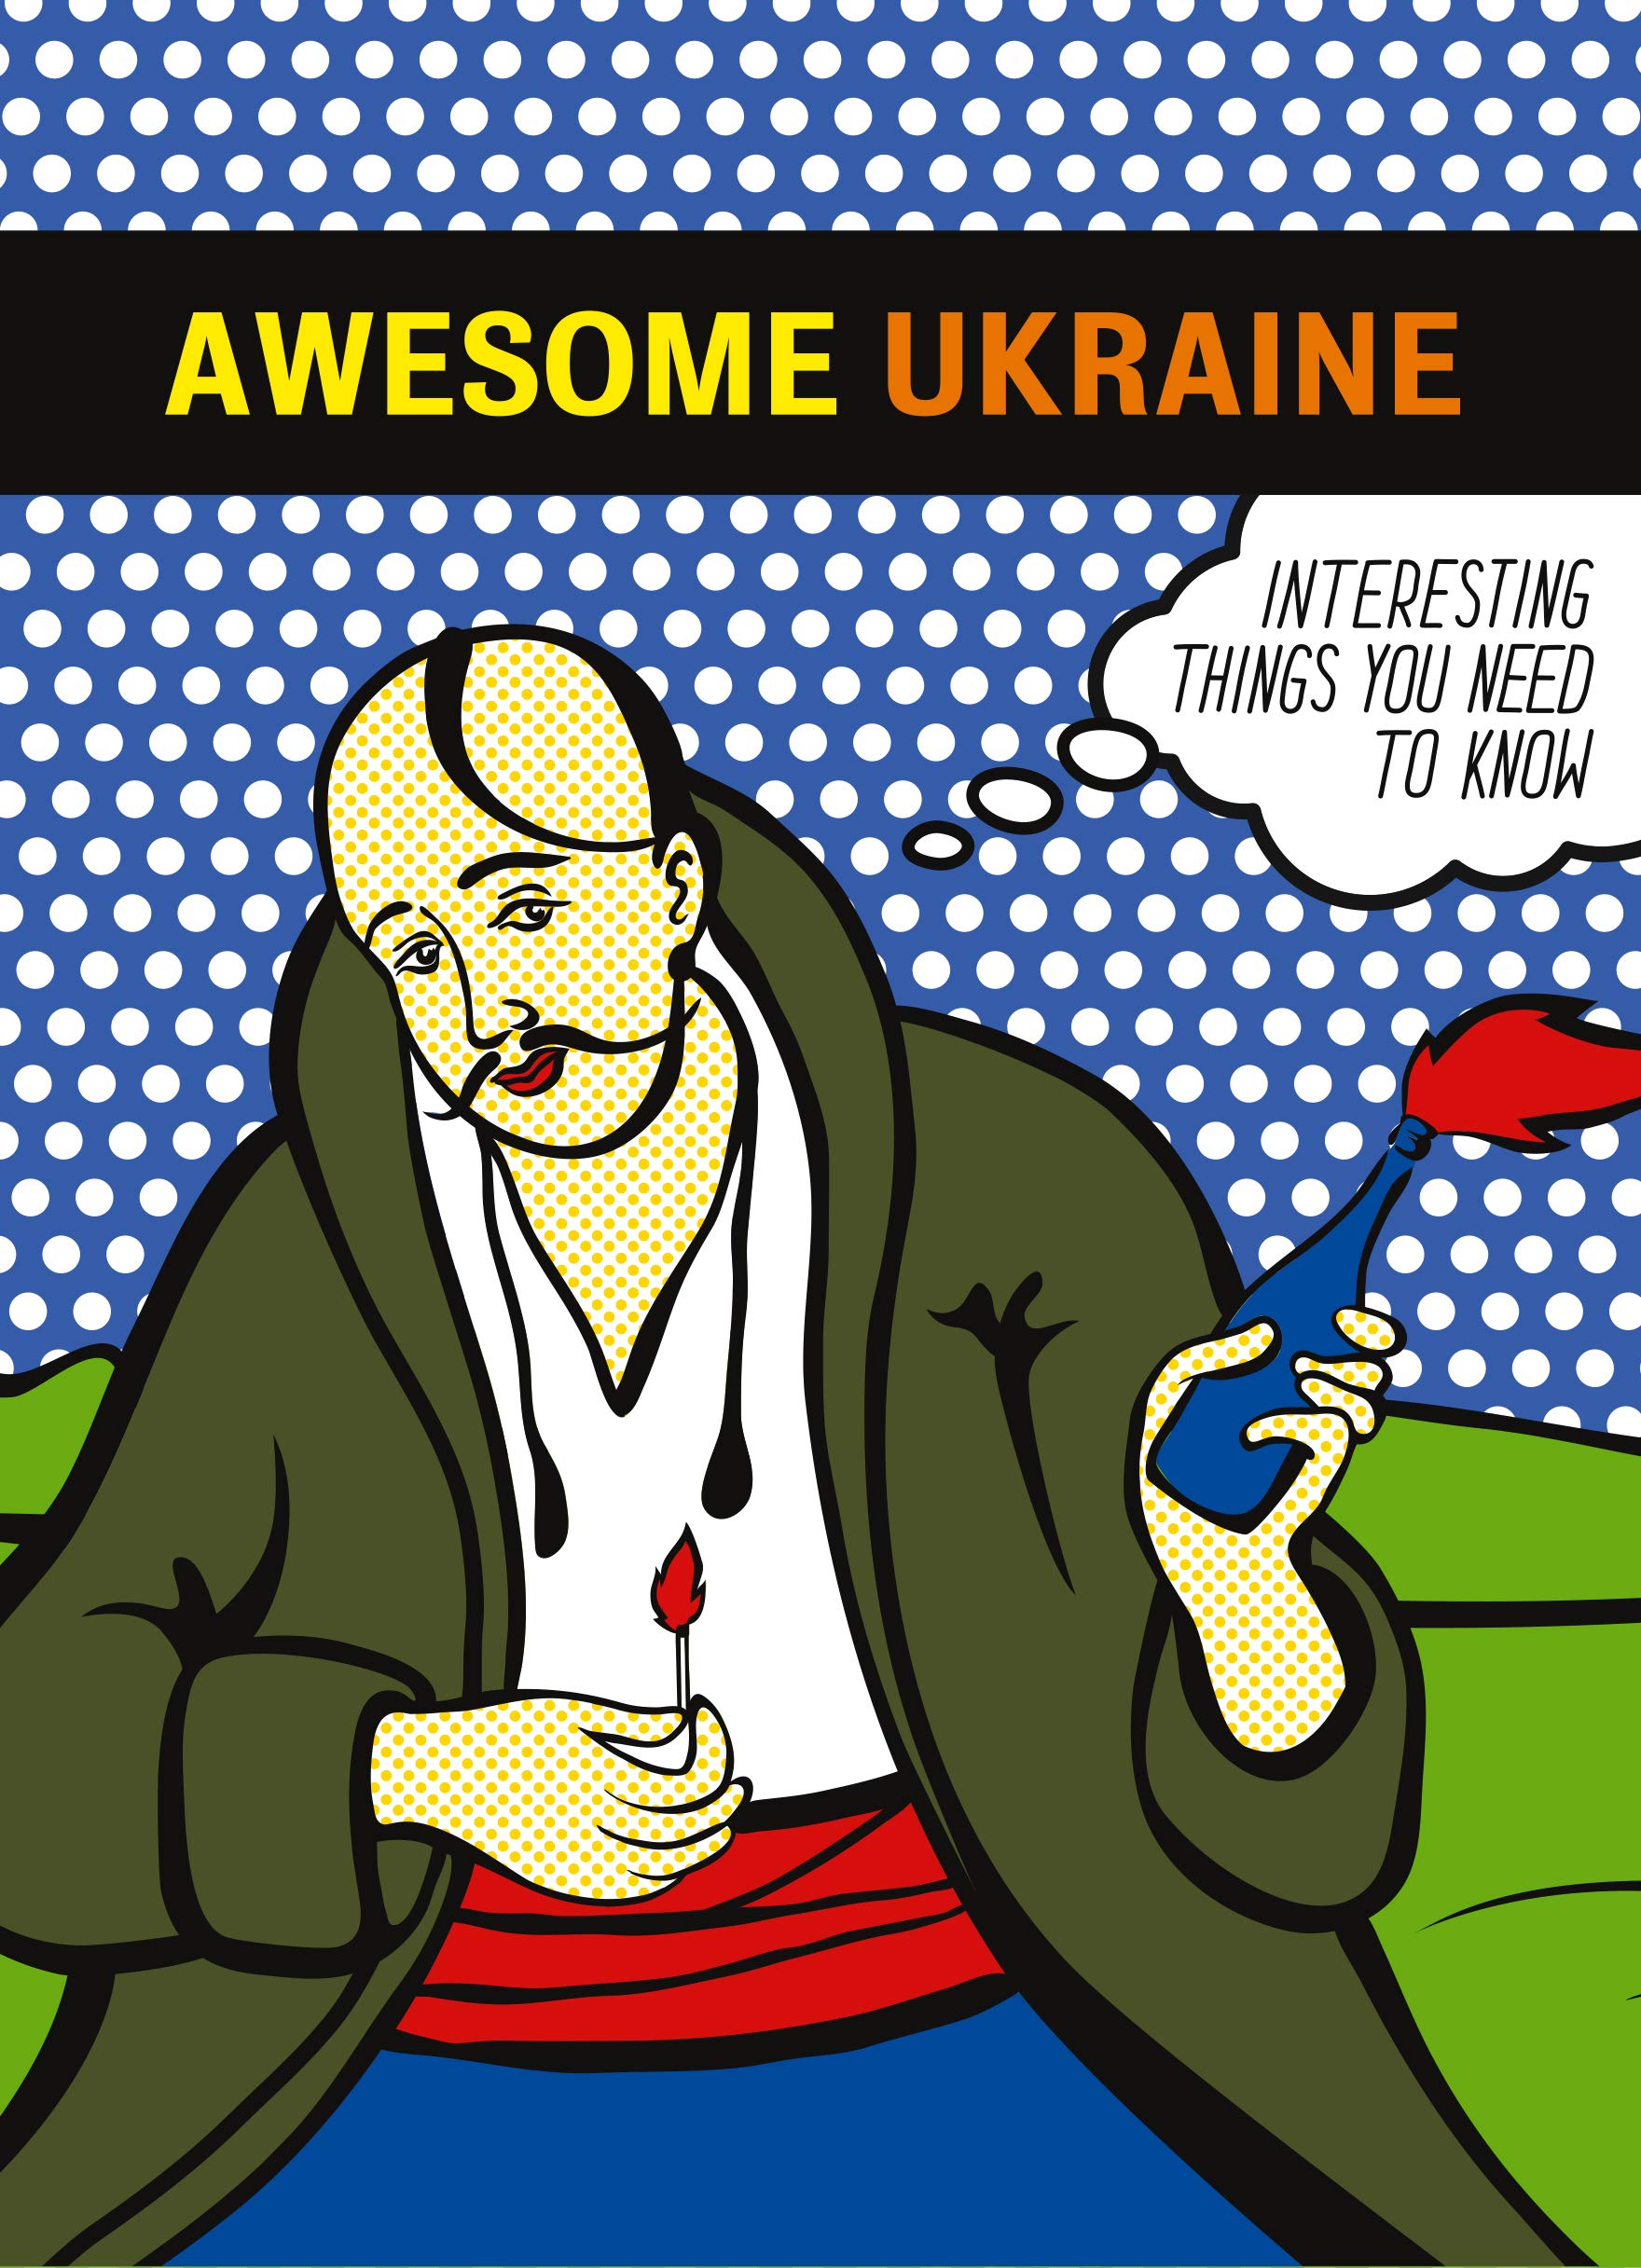 Awesome Ukraine: Interesting Things You Need To Know - Your Ukraine Travel Guide & Guidebook